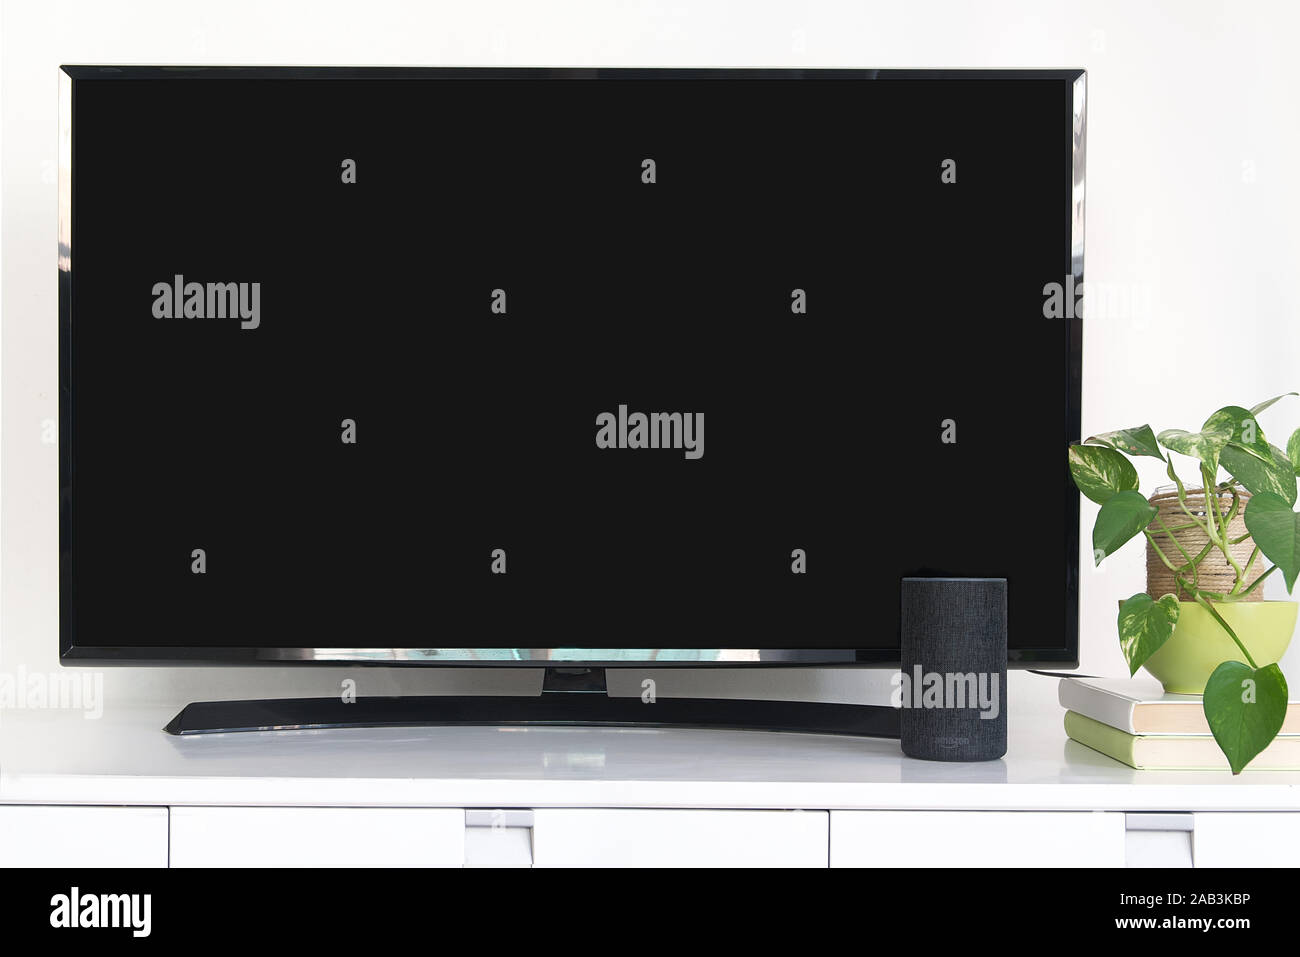 Alexa Echo Intelligent speaker device as home automation system to control a smart television. Living room with a black screen of a tv. Stock Photo